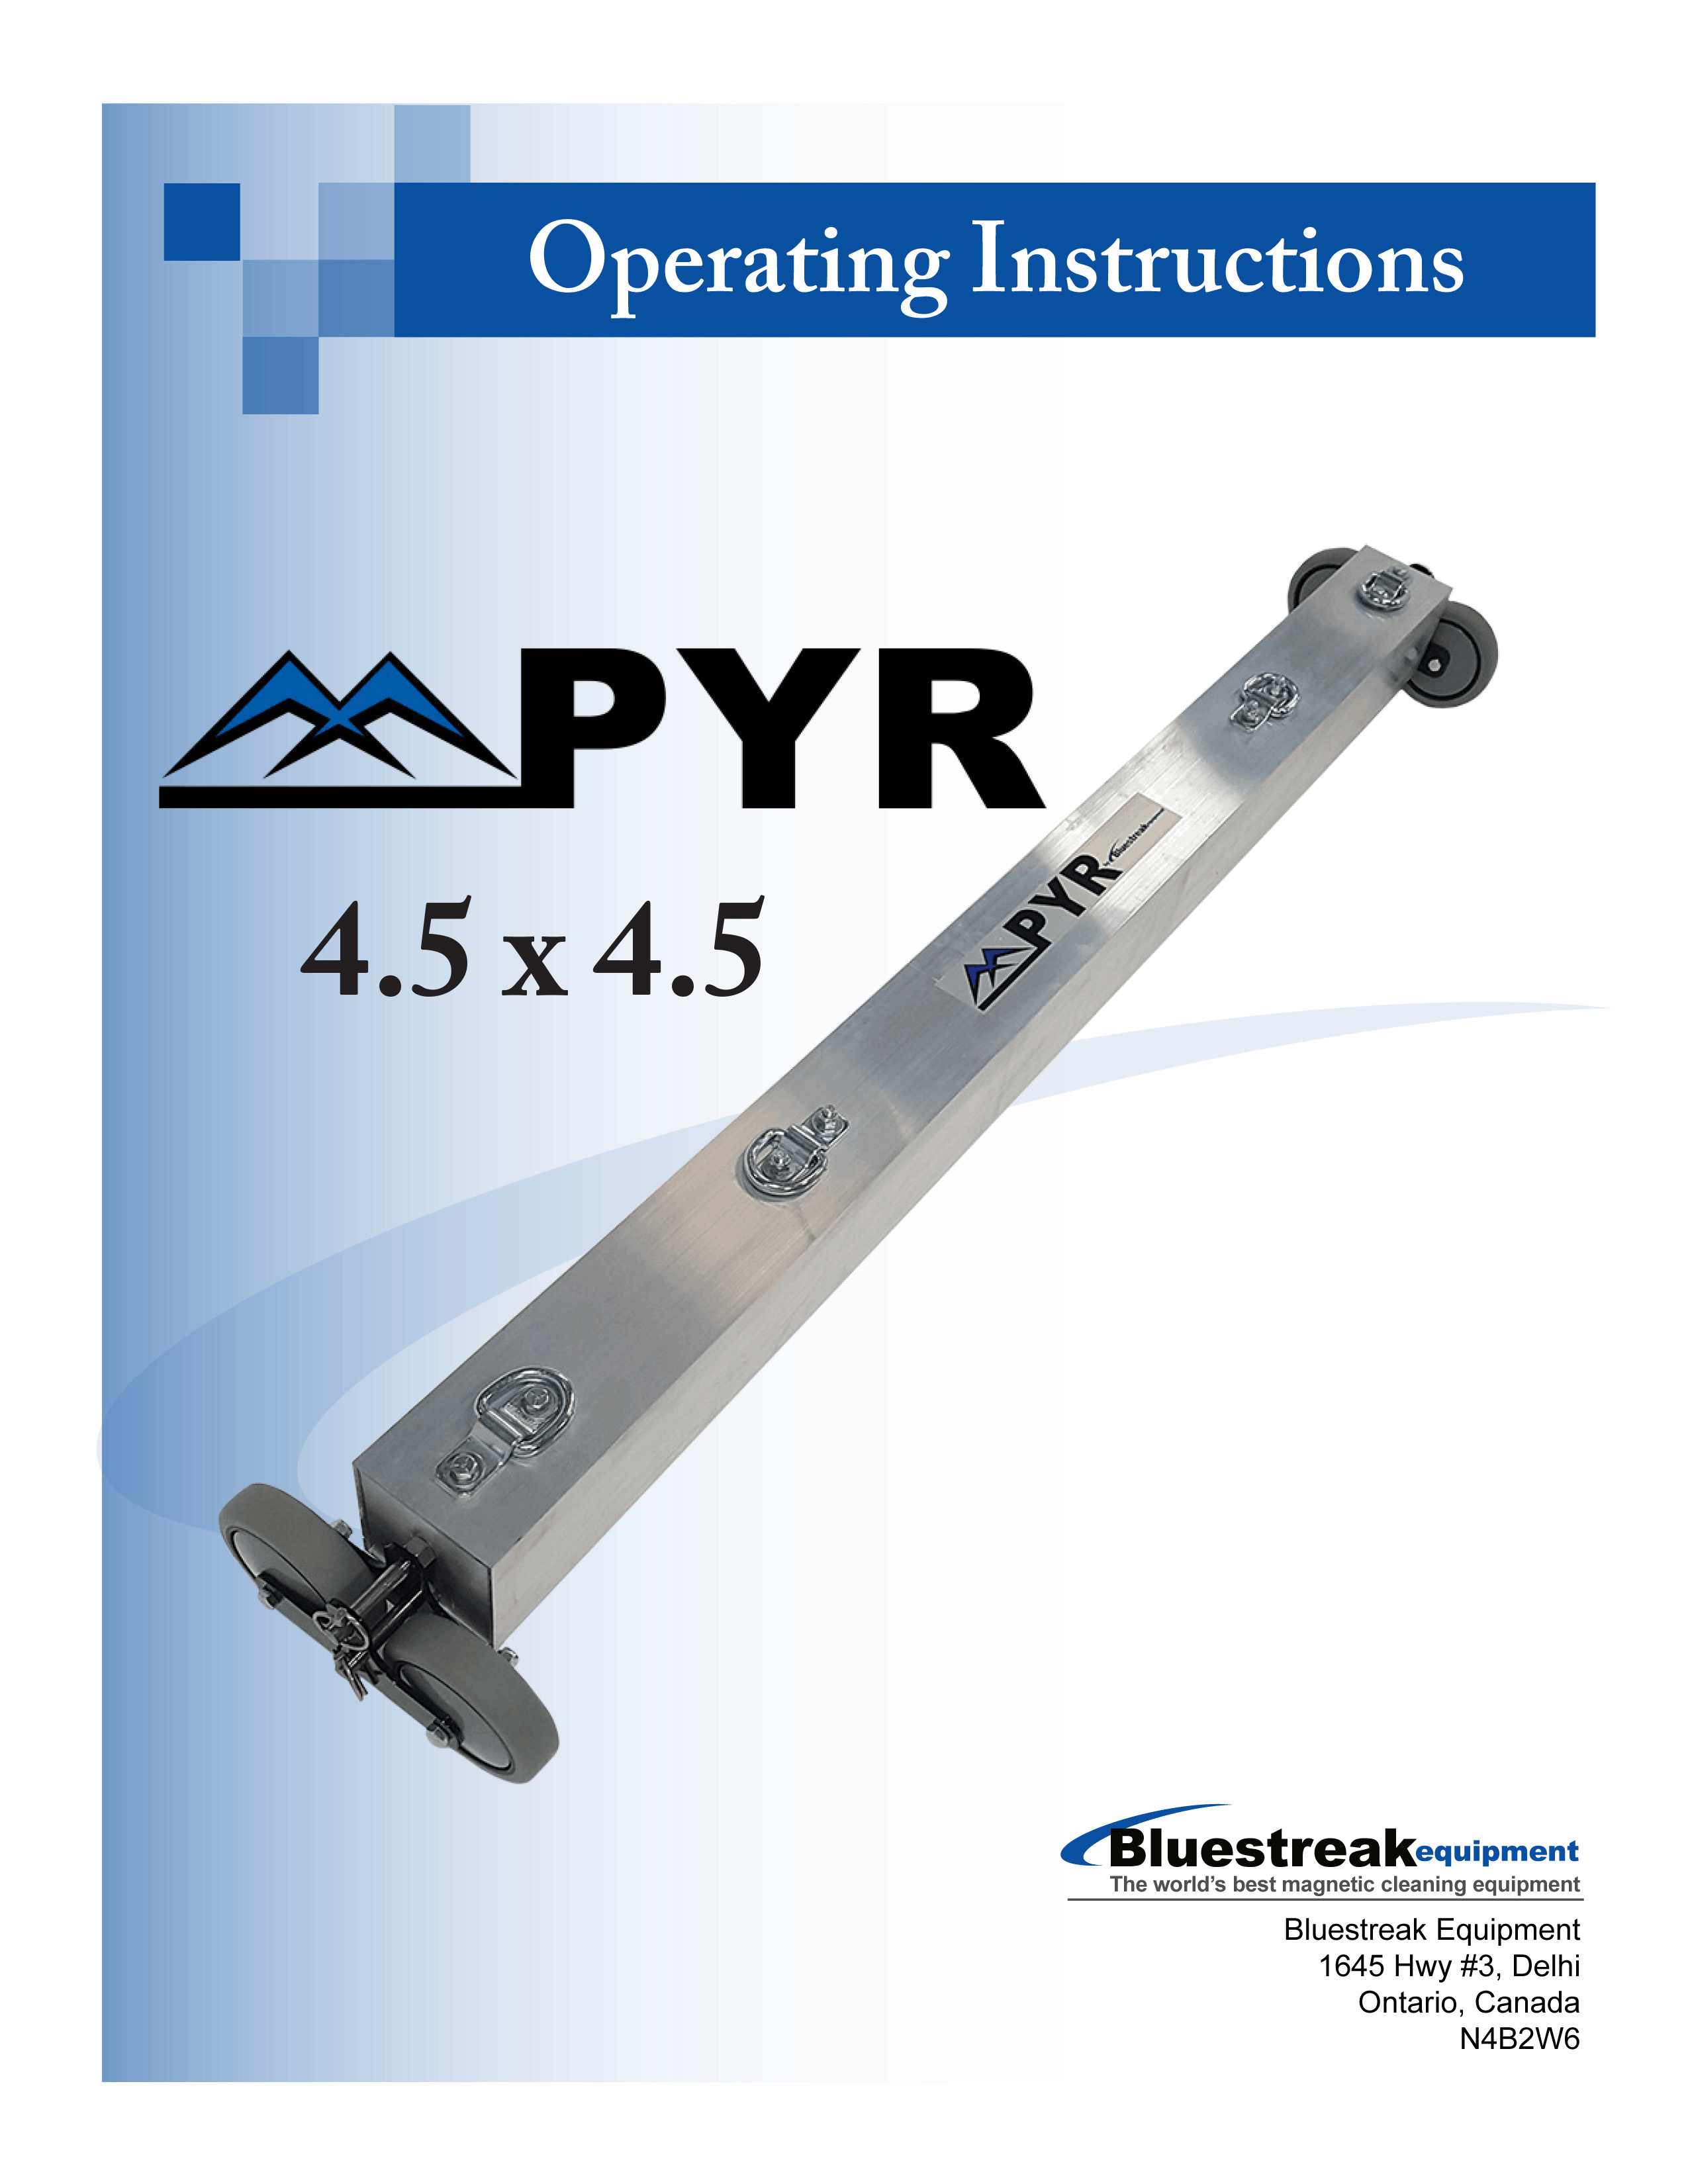 PYR 4.5x4.5 Operating Instructions